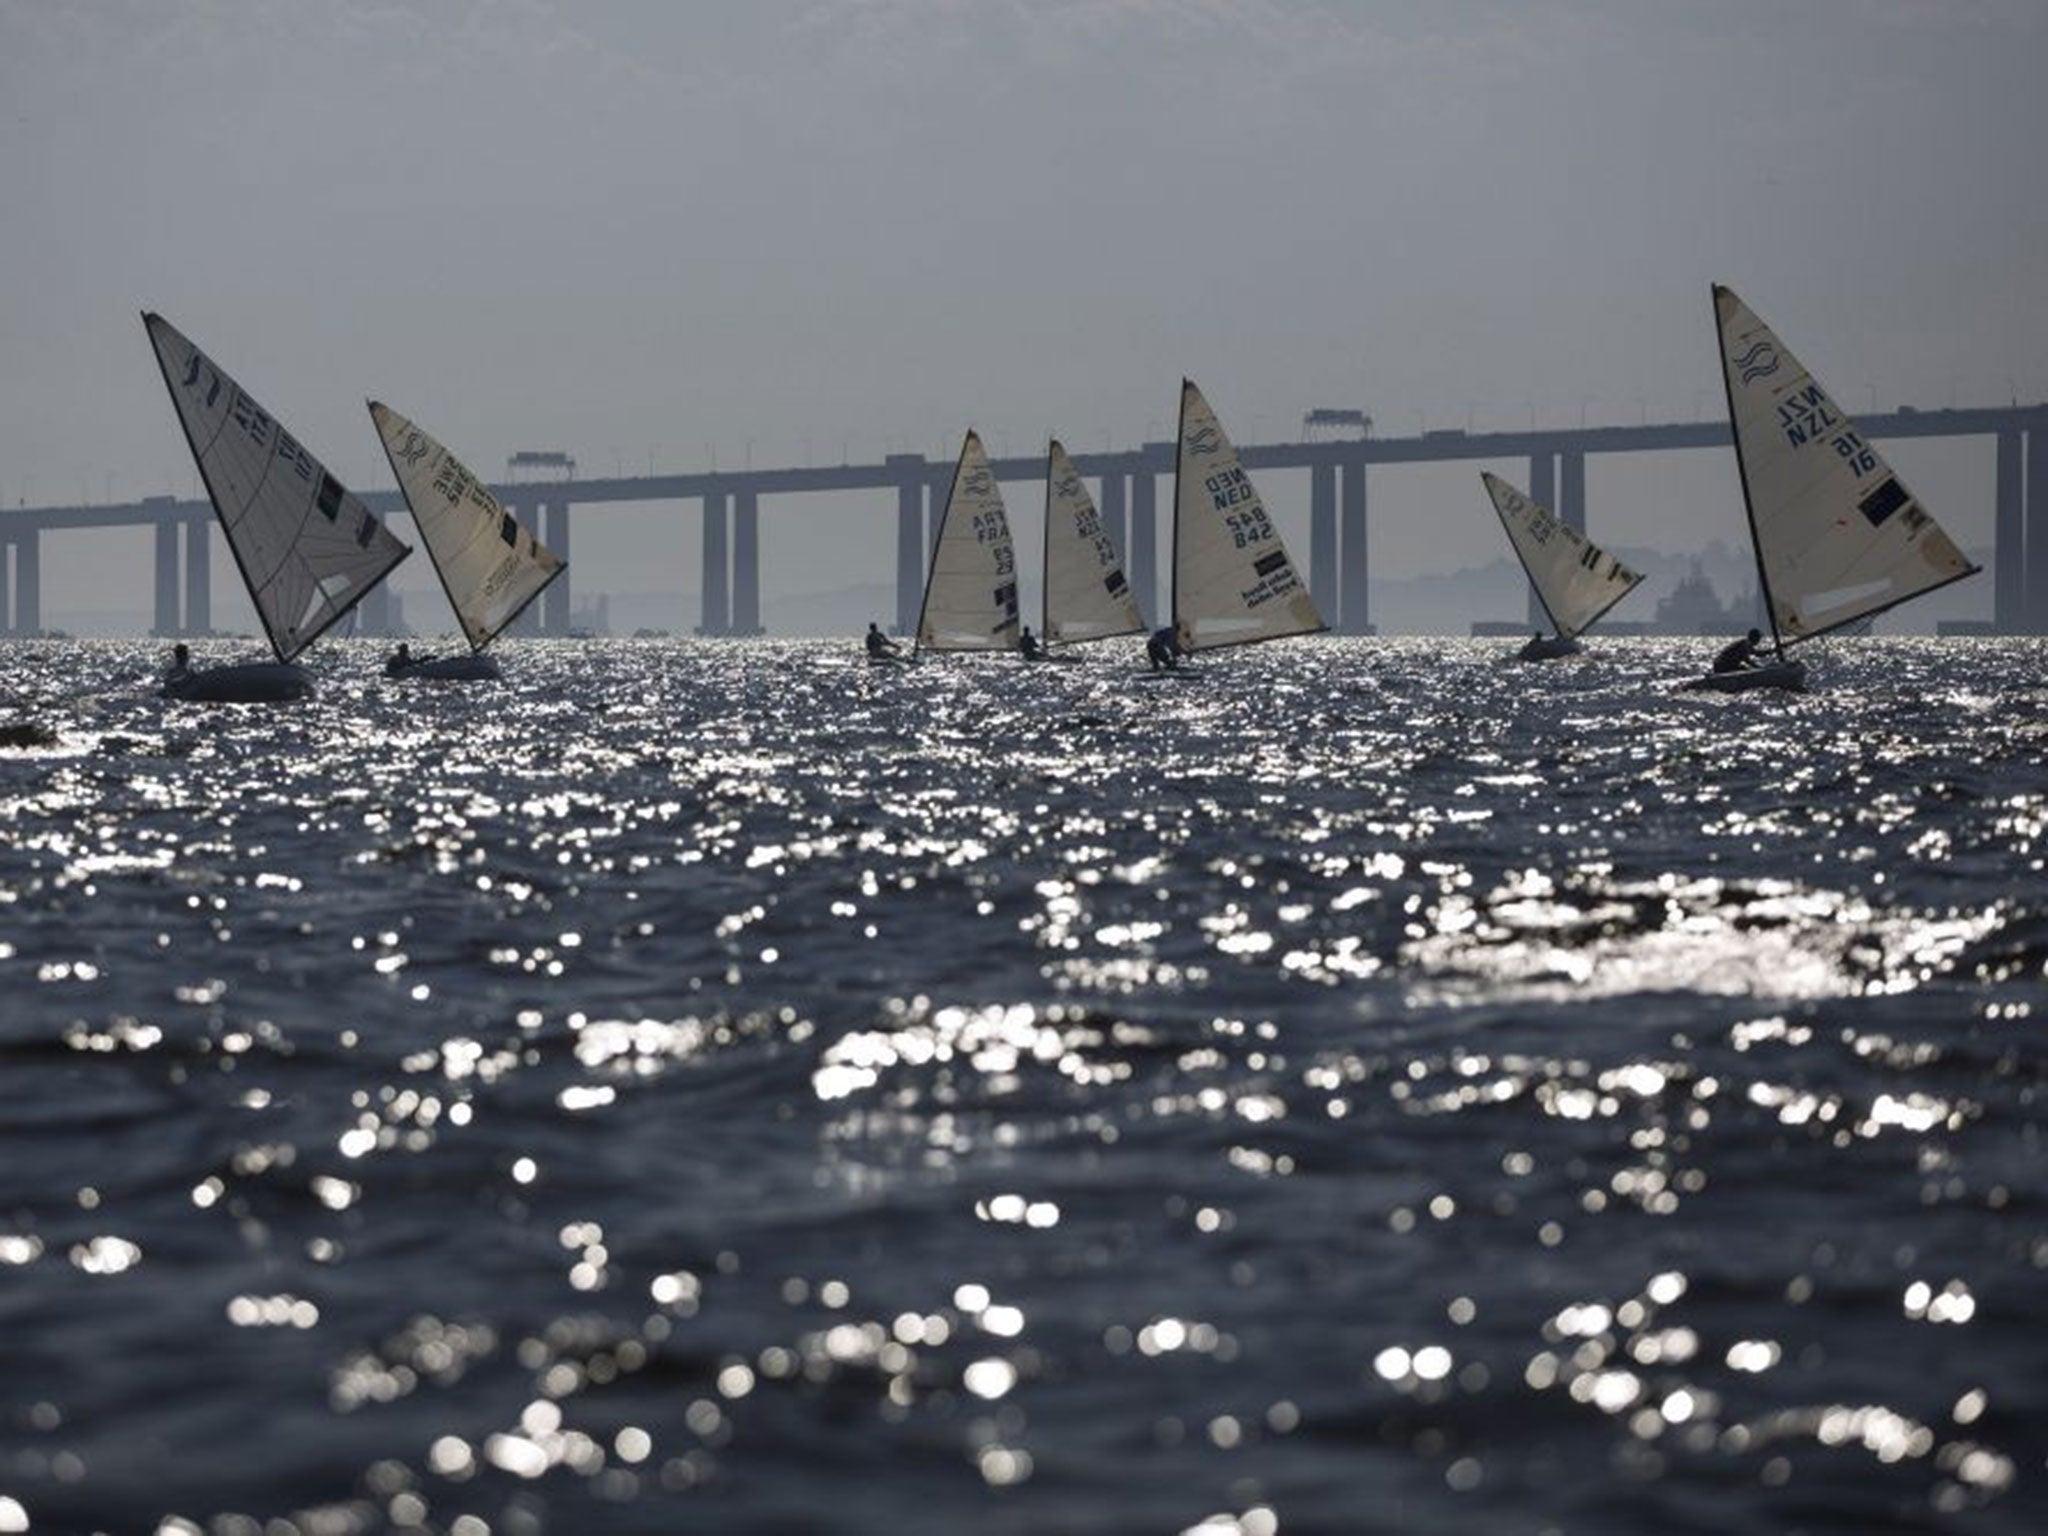 Athletes of the Finn class compete during the first test event for the Rio 2016 Olympic Games at the Guanabara Bay in Rio de Janeiro, Brazil, on 3 August, 2014